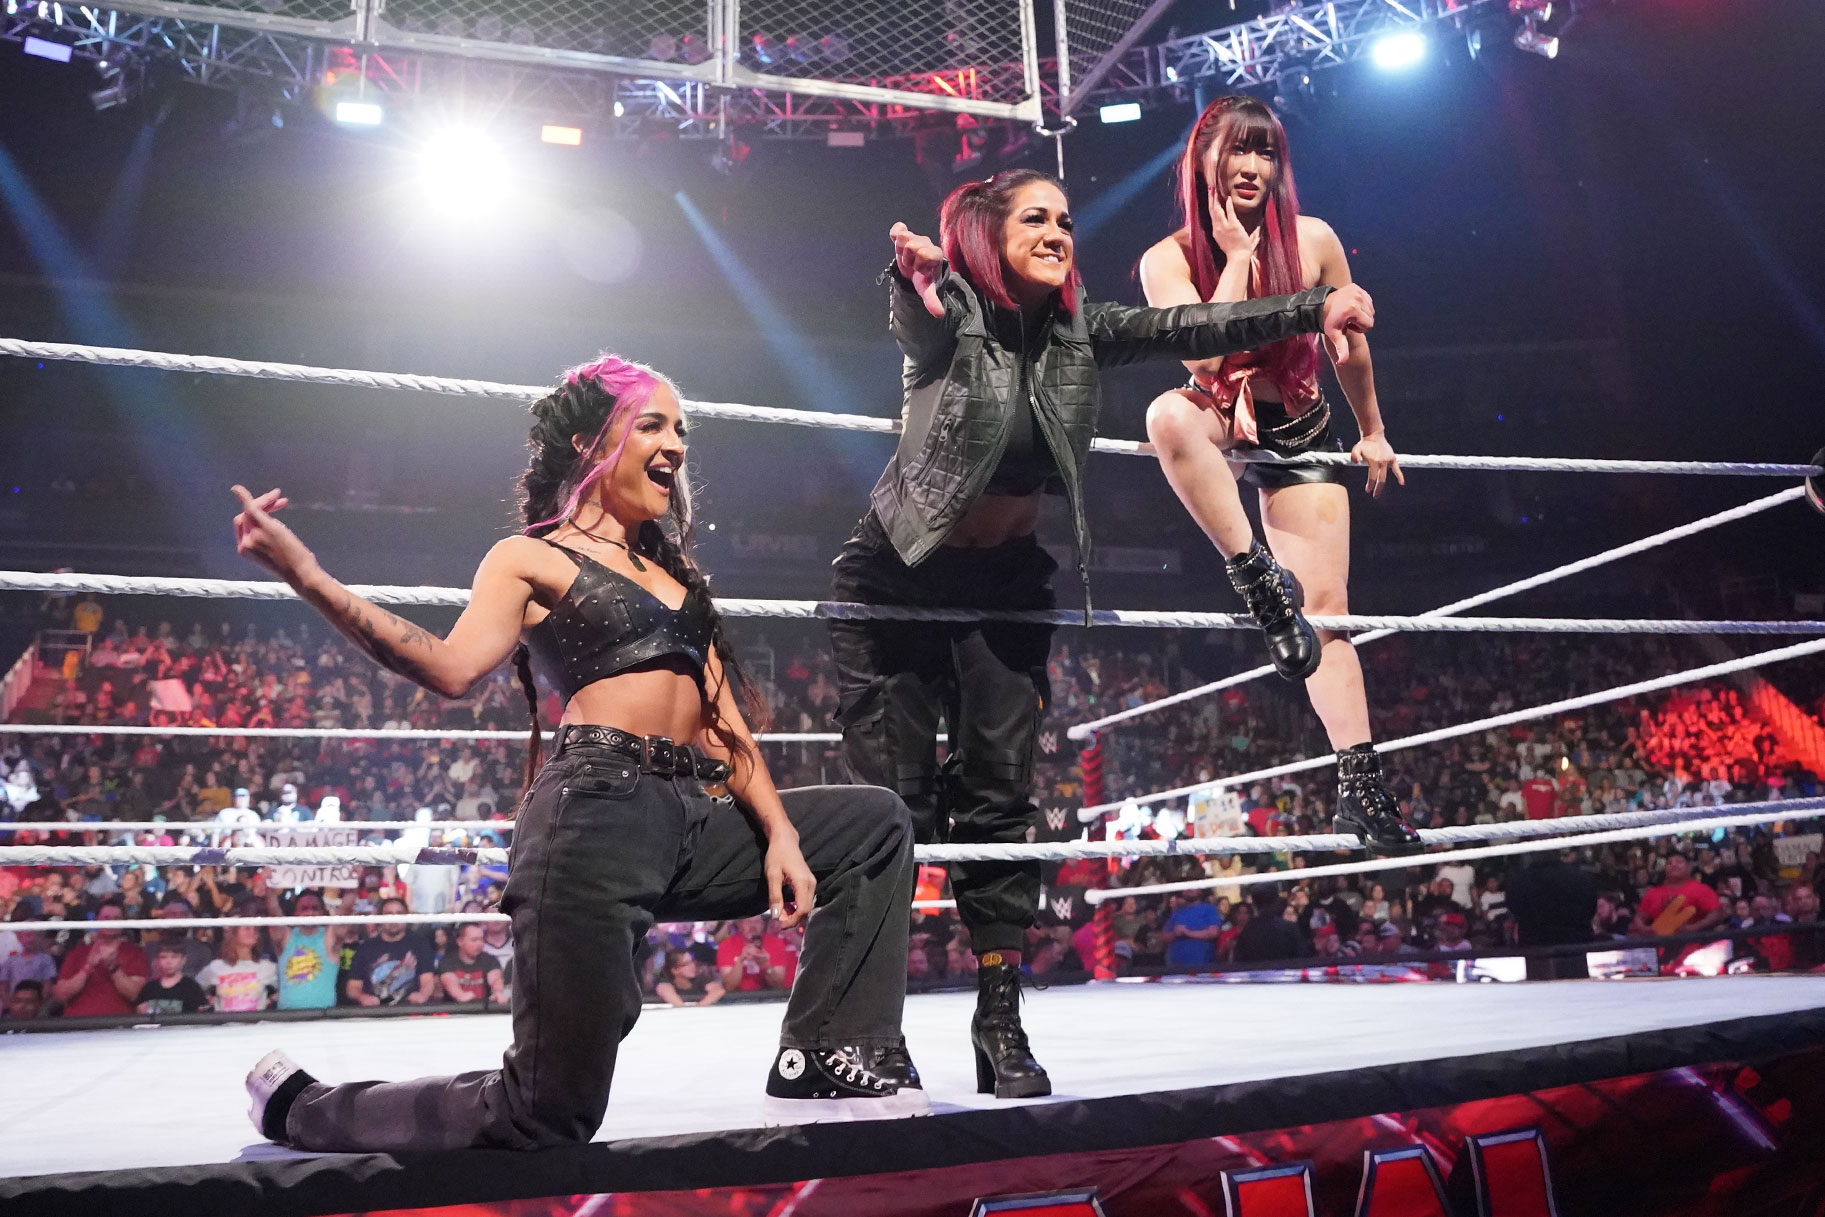 WWE's Damage Ctrl celebrating their victory in the ring